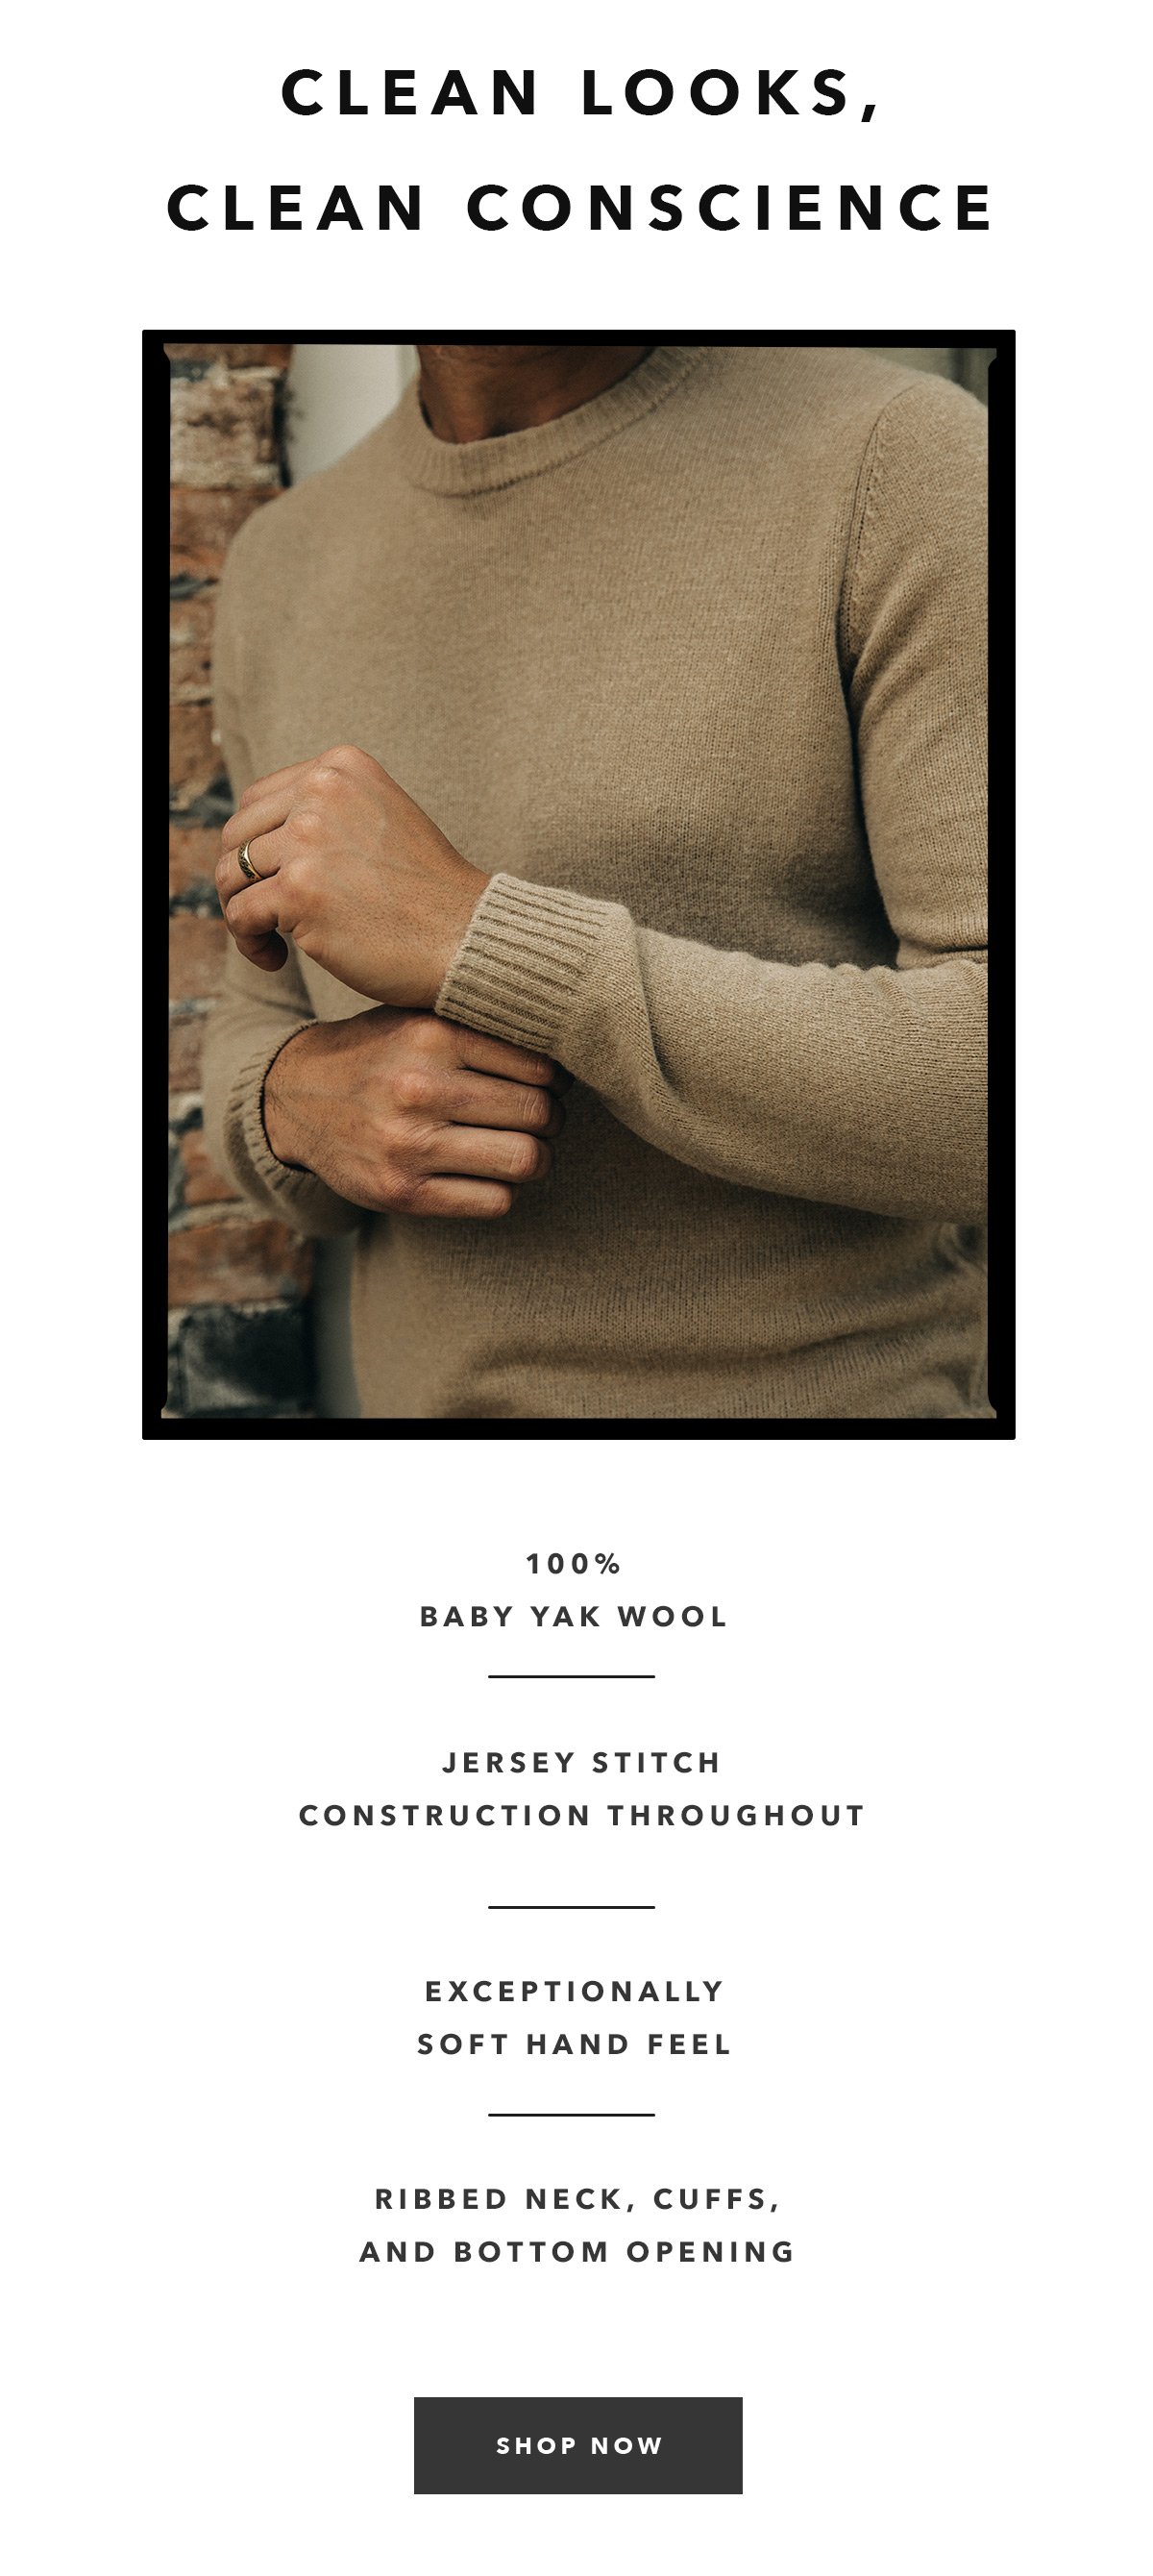 Clean Looks, Clean Conscience: 100% baby yak, jersey stitch construction throughout, exceptionally soft hand feel, ribbed neck, cuffs, and bottom opening.